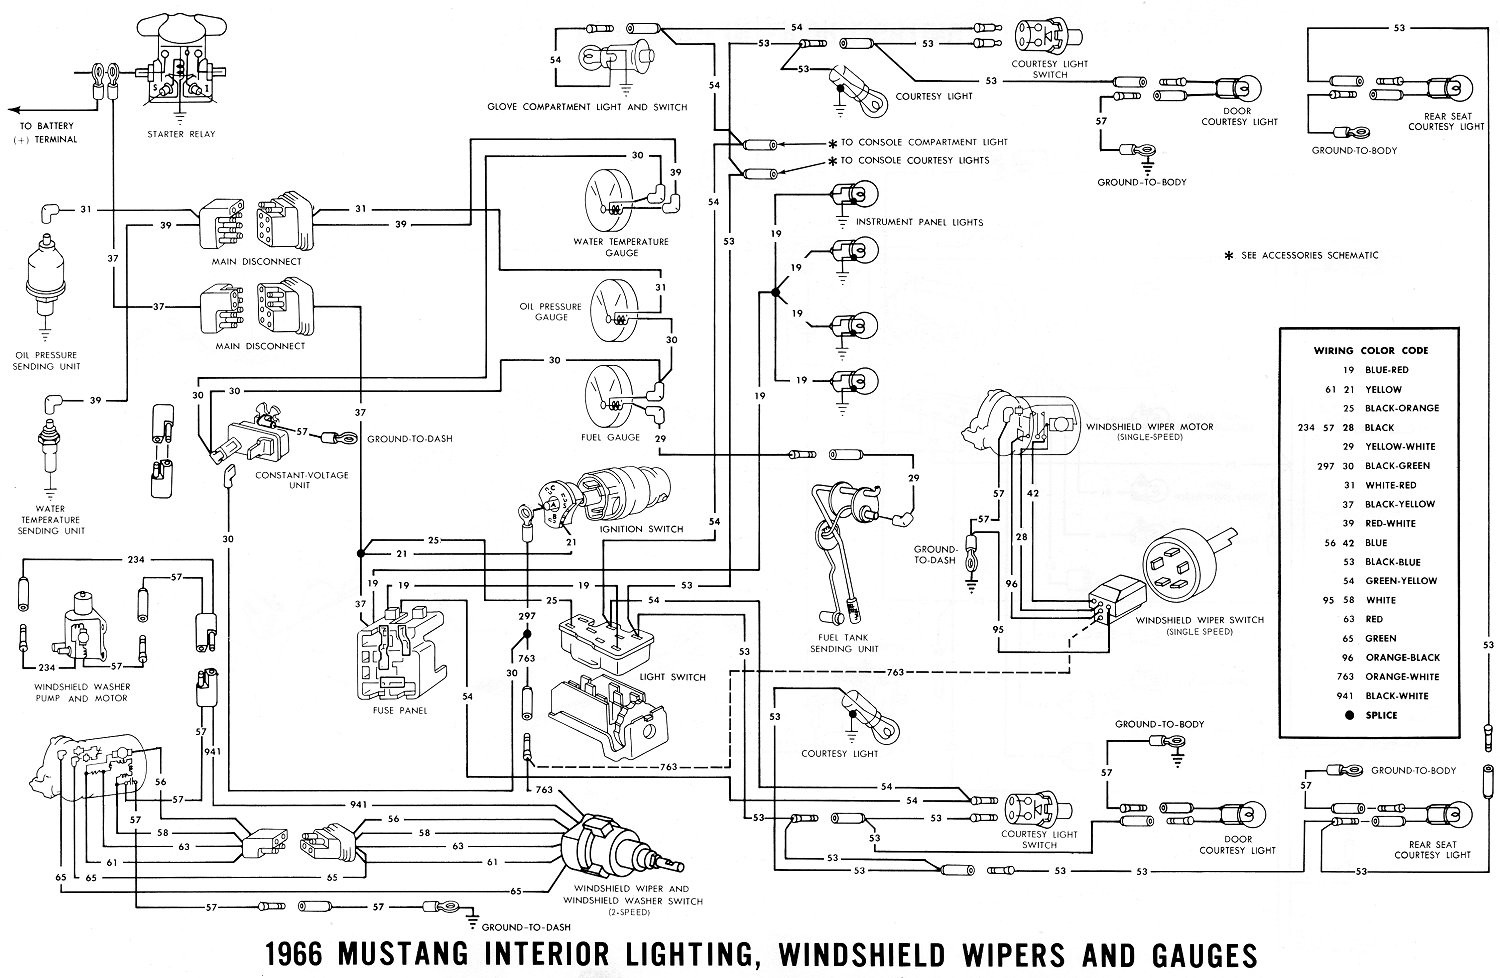 1967 Mustang Wiring Diagram Pdf WIRE Center •